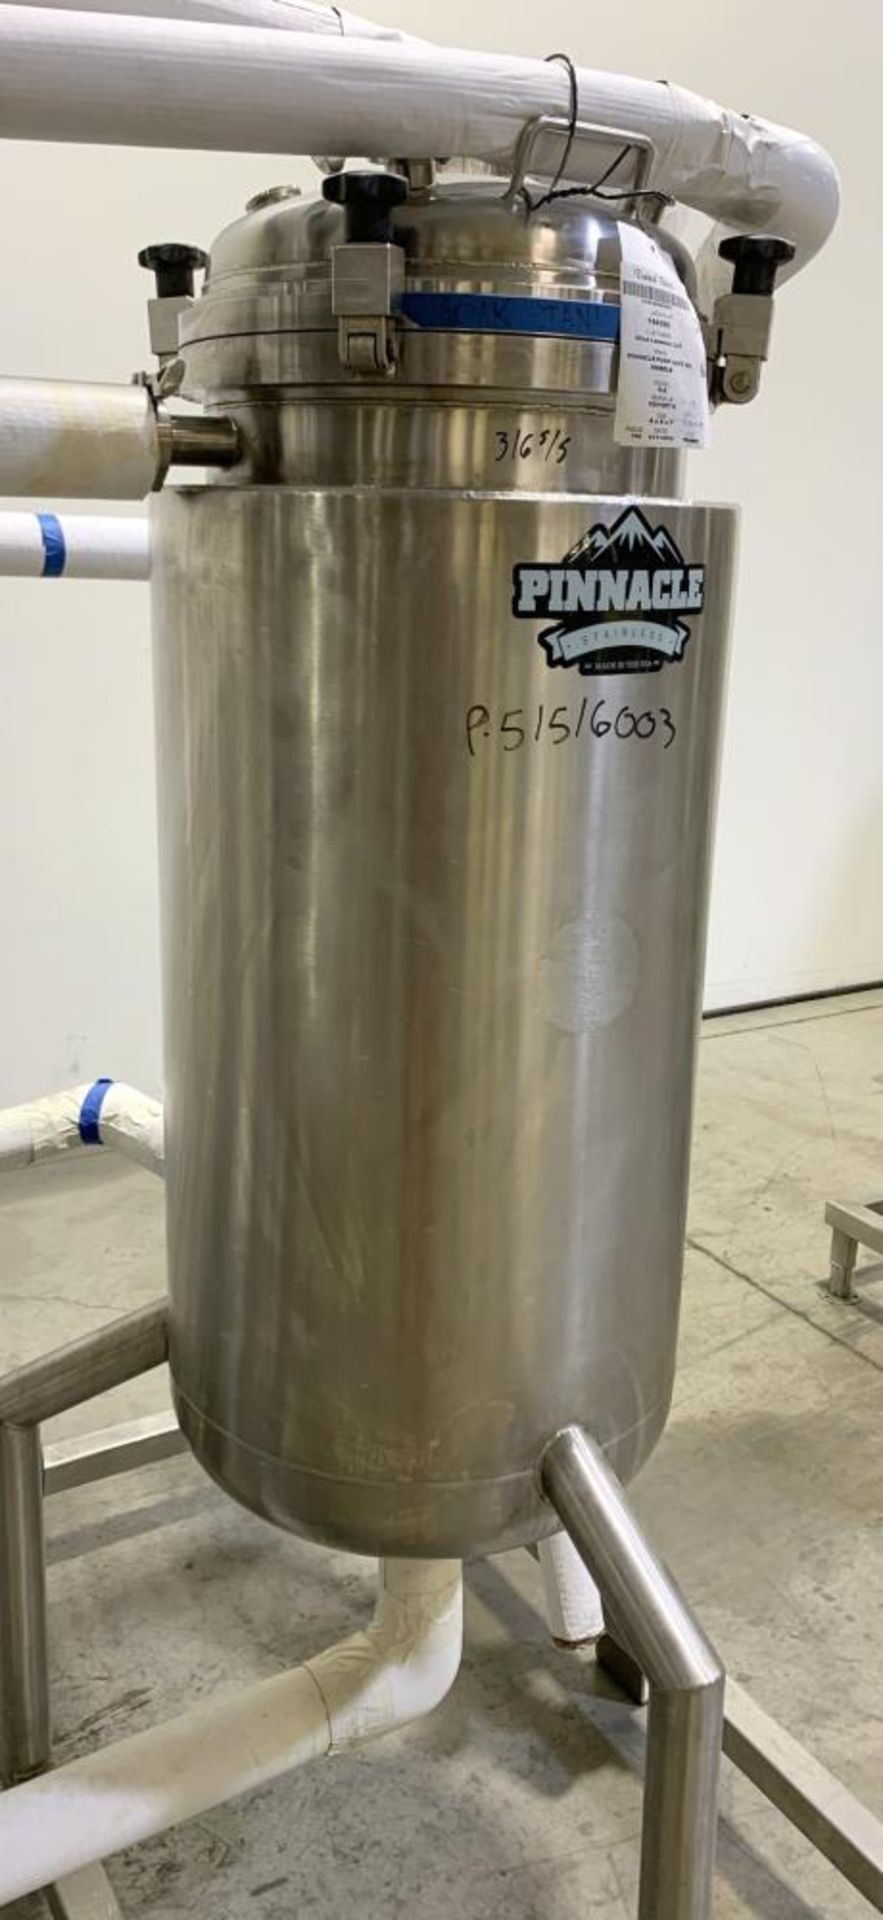 Pinnacle Stainless Complete Full Set Up Extraction Bundle - Image 213 of 273